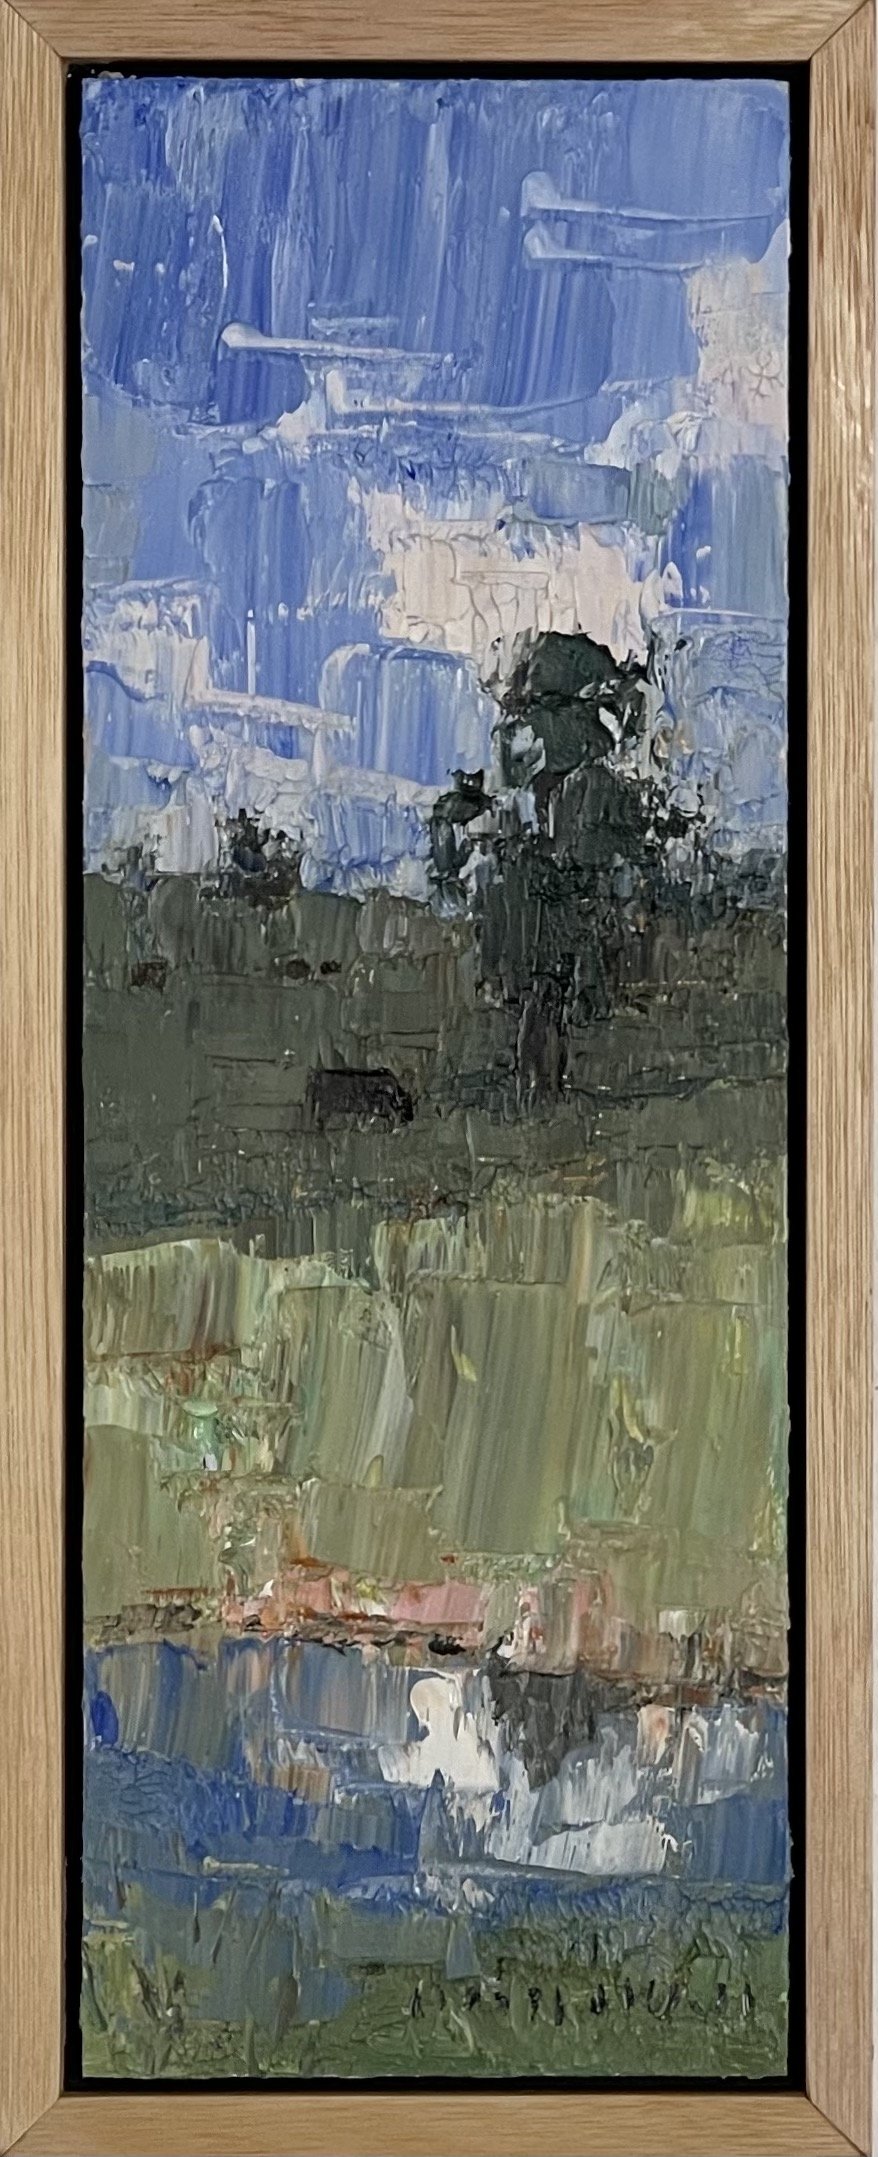  Reflecting Tranquility 36x13cm framed oil on board $900